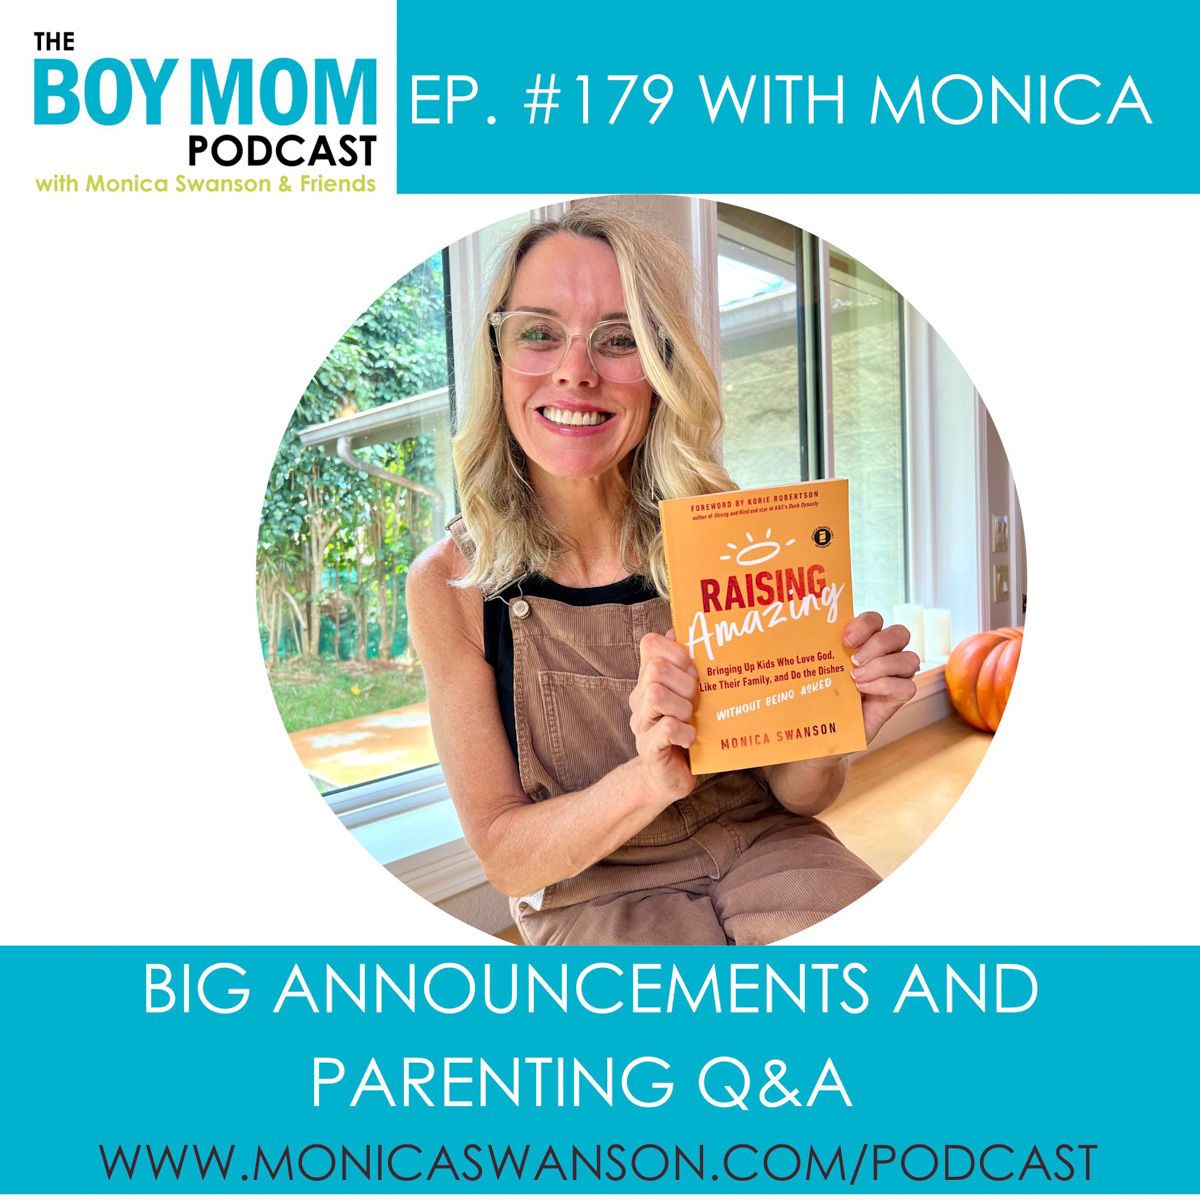 Big Announcements and Parenting Q&A {Episode-179 with Monica}